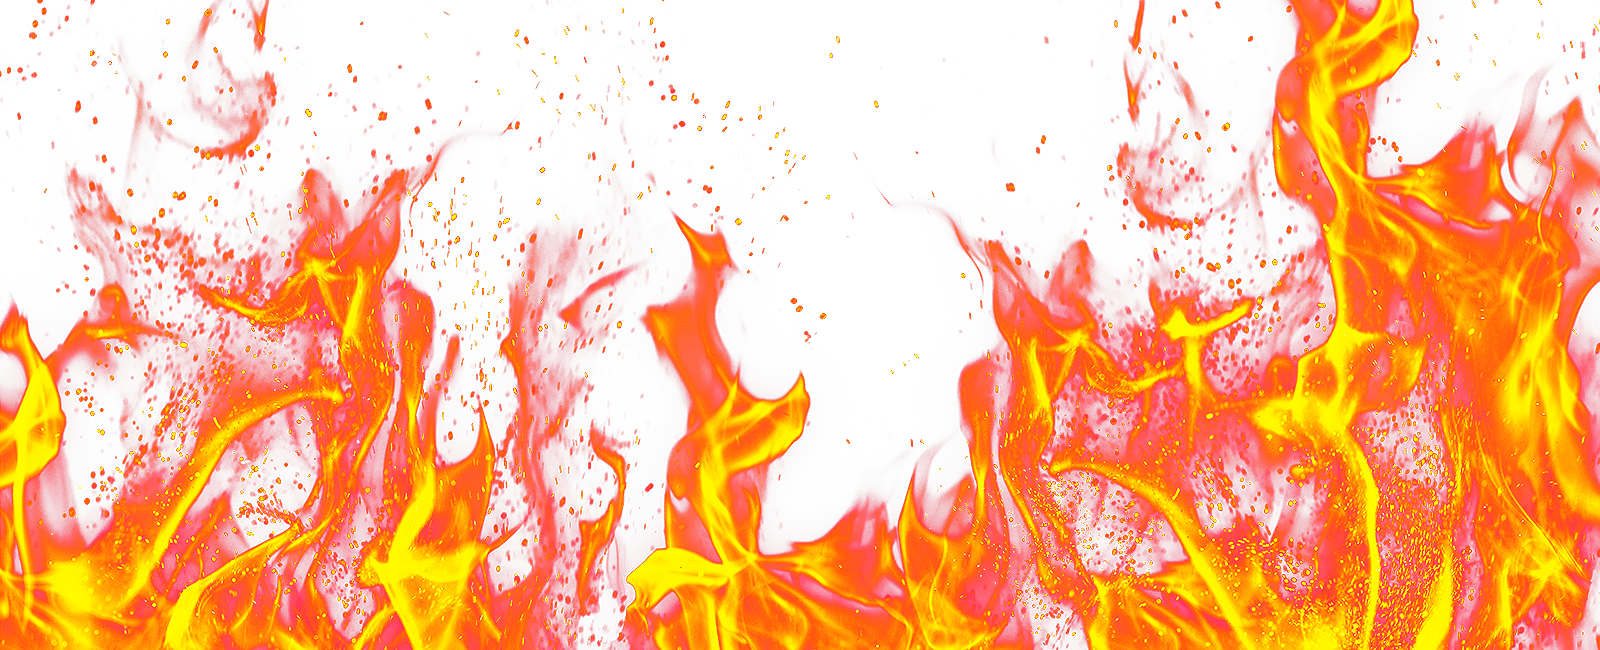 Fire Png6032.png - Fire Gif, Transparent background PNG HD thumbnail